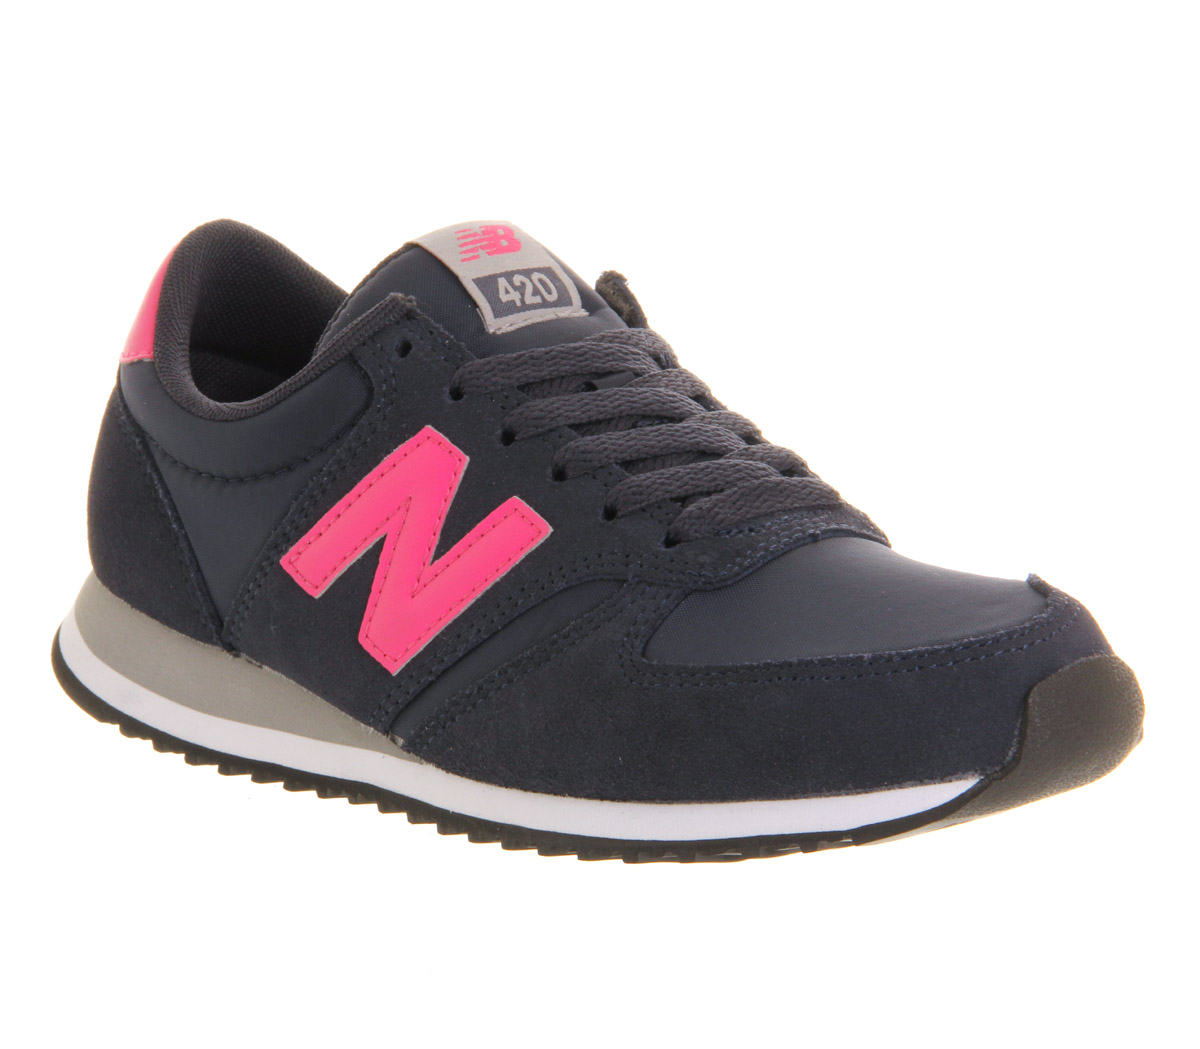 new balance 420 pink suede